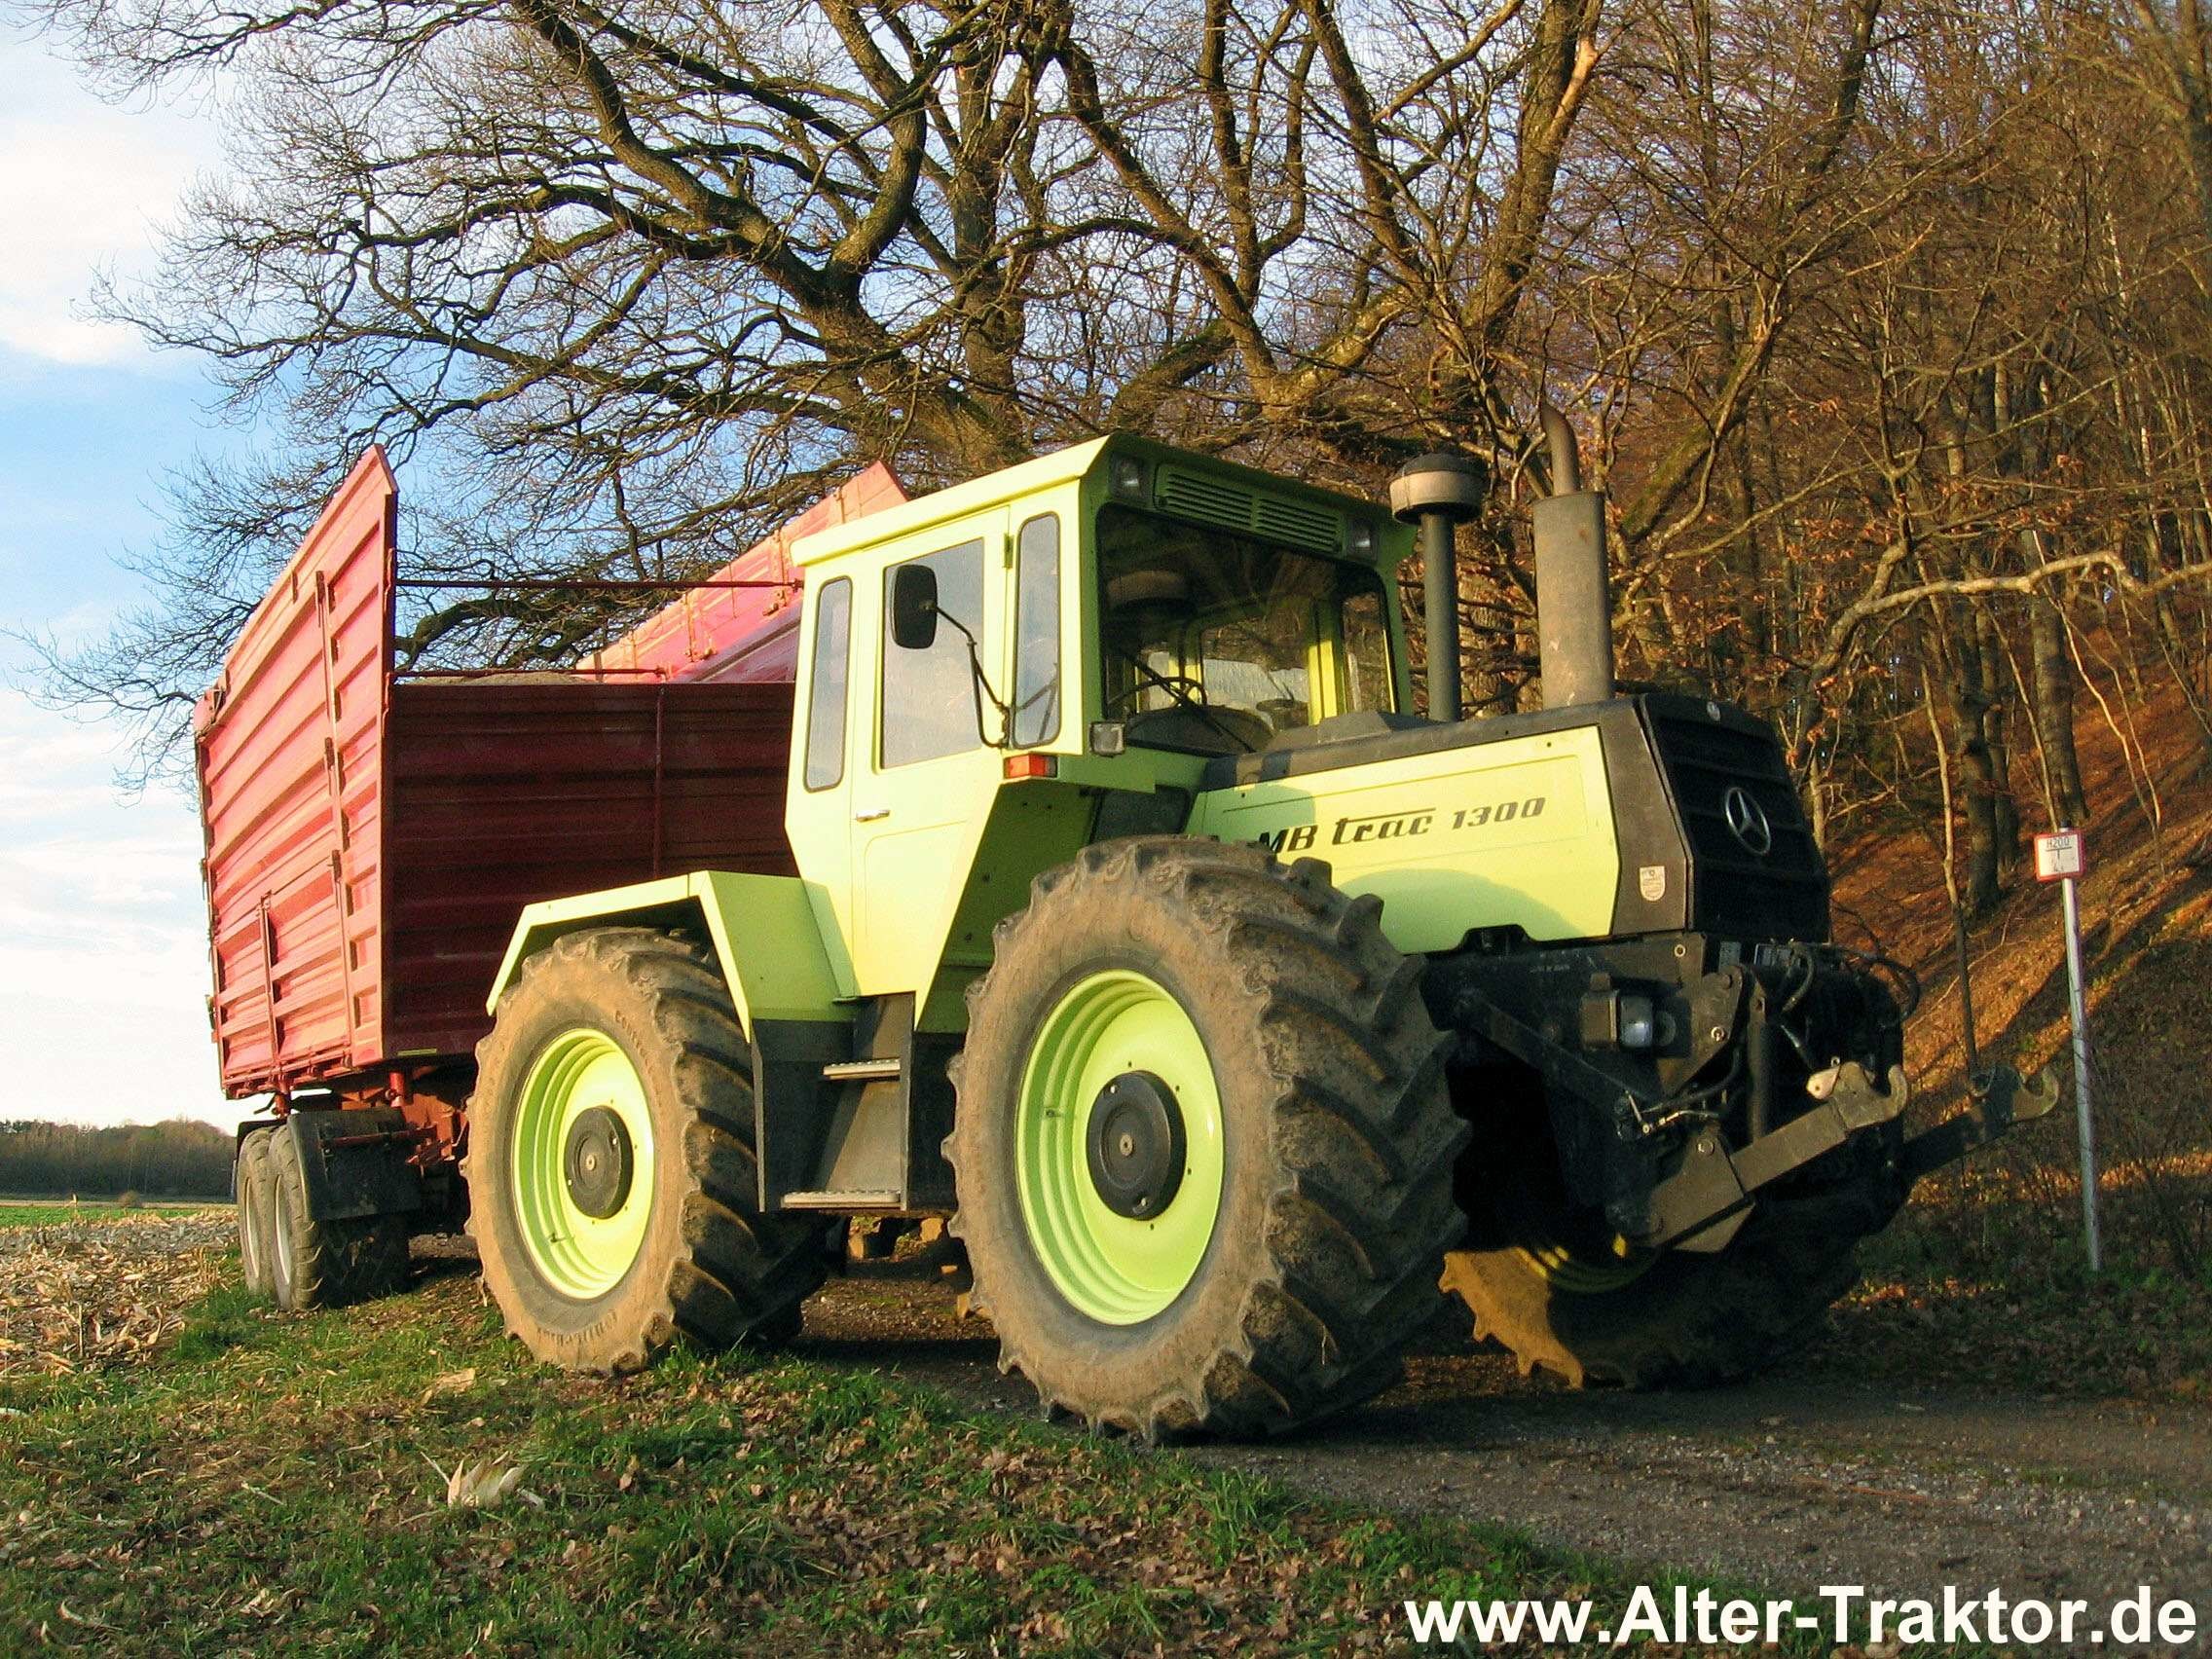 mb wallpaper,land vehicle,vehicle,tractor,agricultural machinery,transport